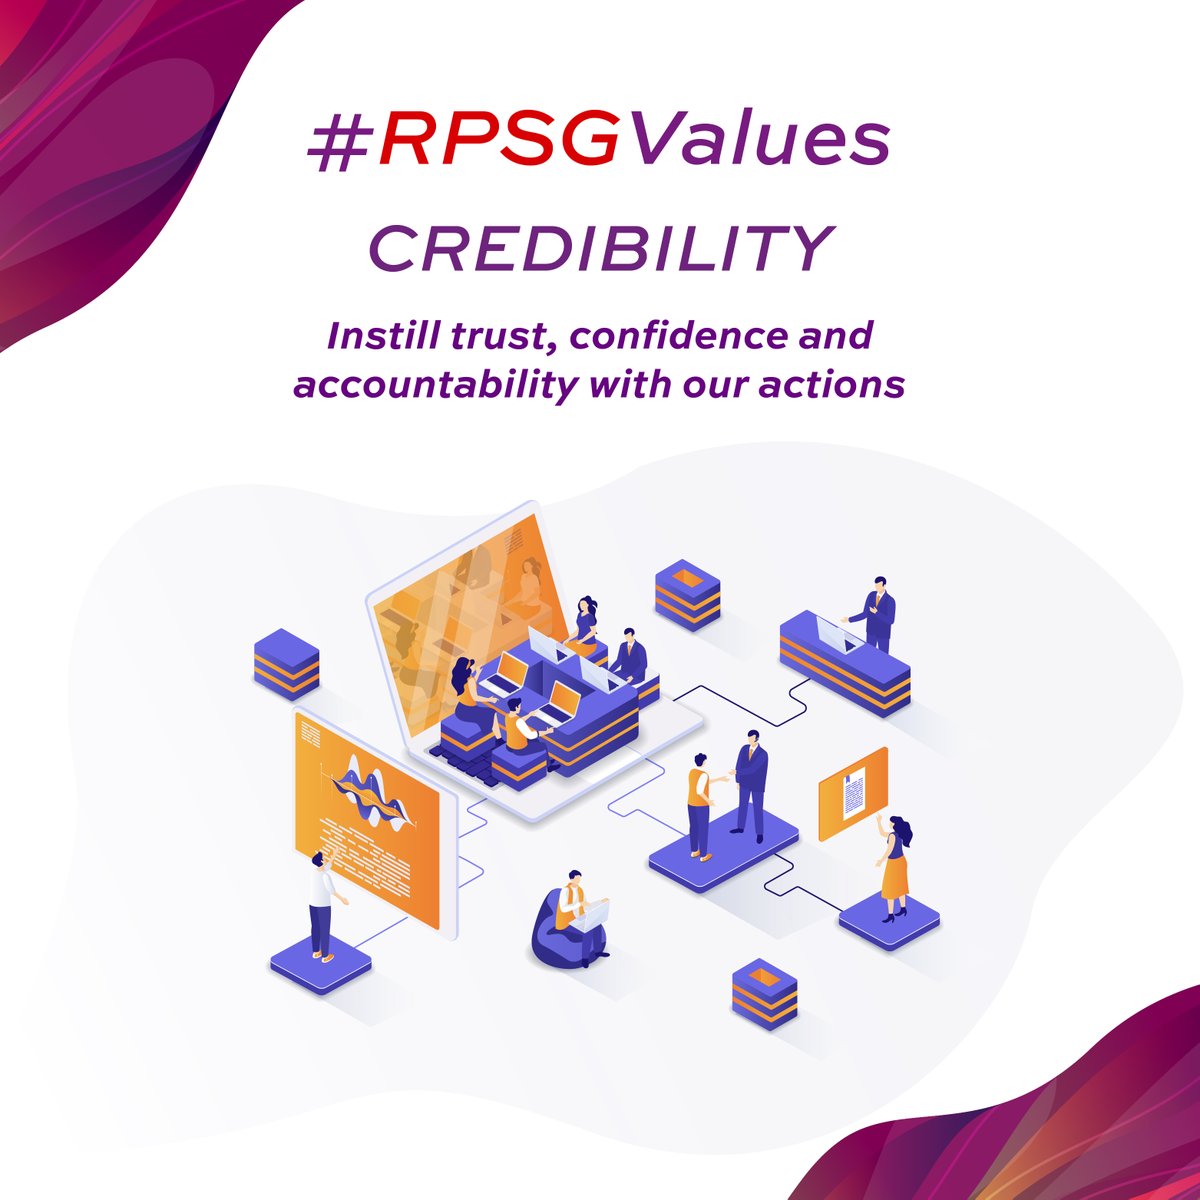 At RPSG Group, Credibility is at the heart of our people-centric culture. Explore our values that have propelled our businesses and enriched the lives of our customers at rpsg.in. #RPSGValues #BusinessExcellence #CareersIndia #GlobalLeadership